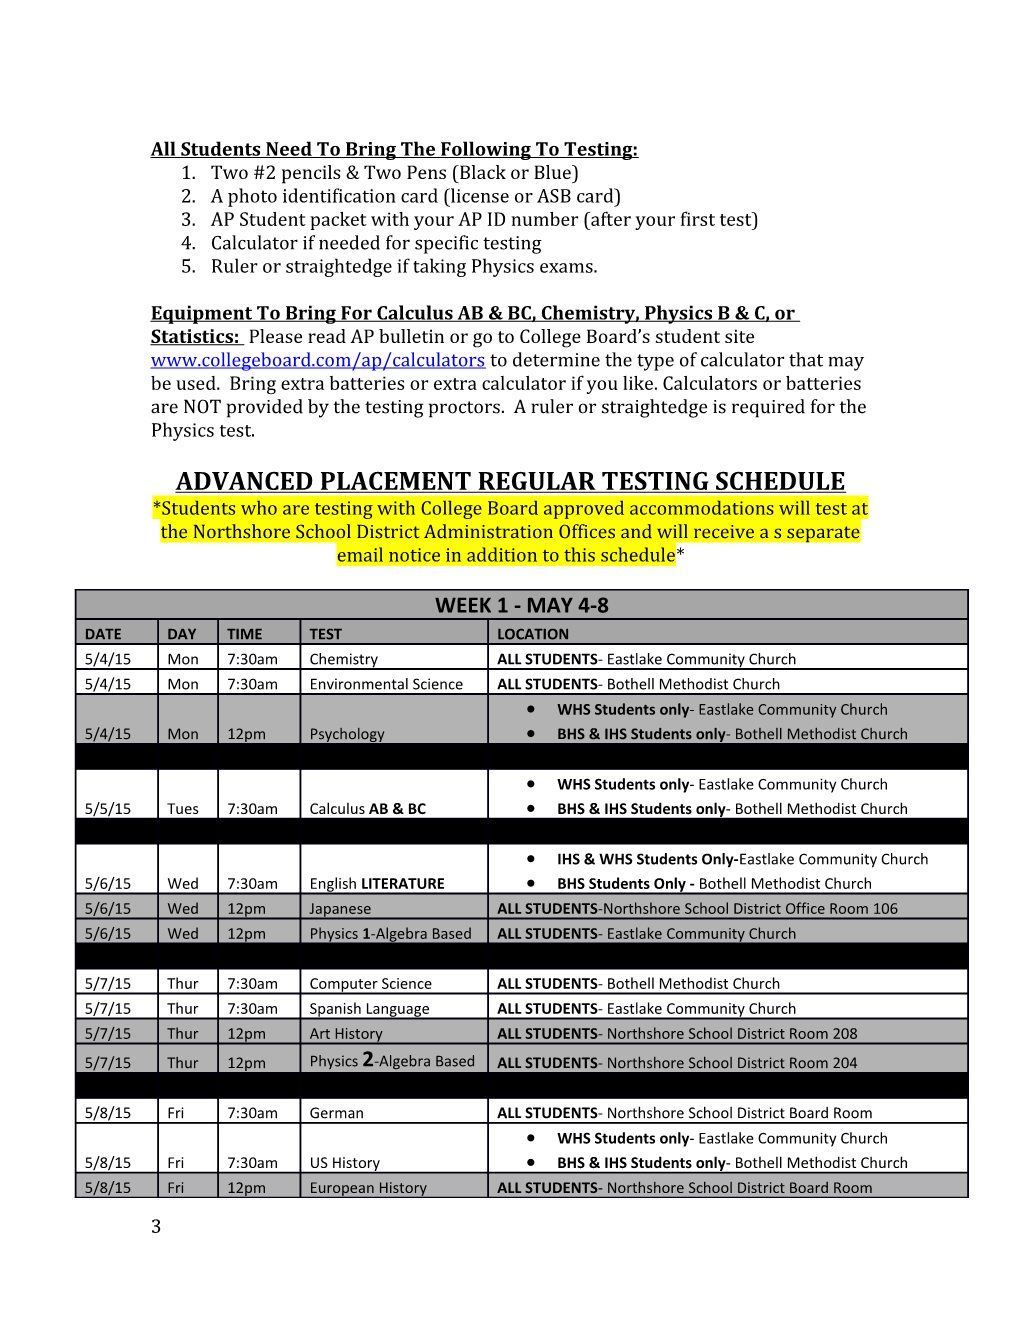 2015 Advanced Placement Testing Schedule